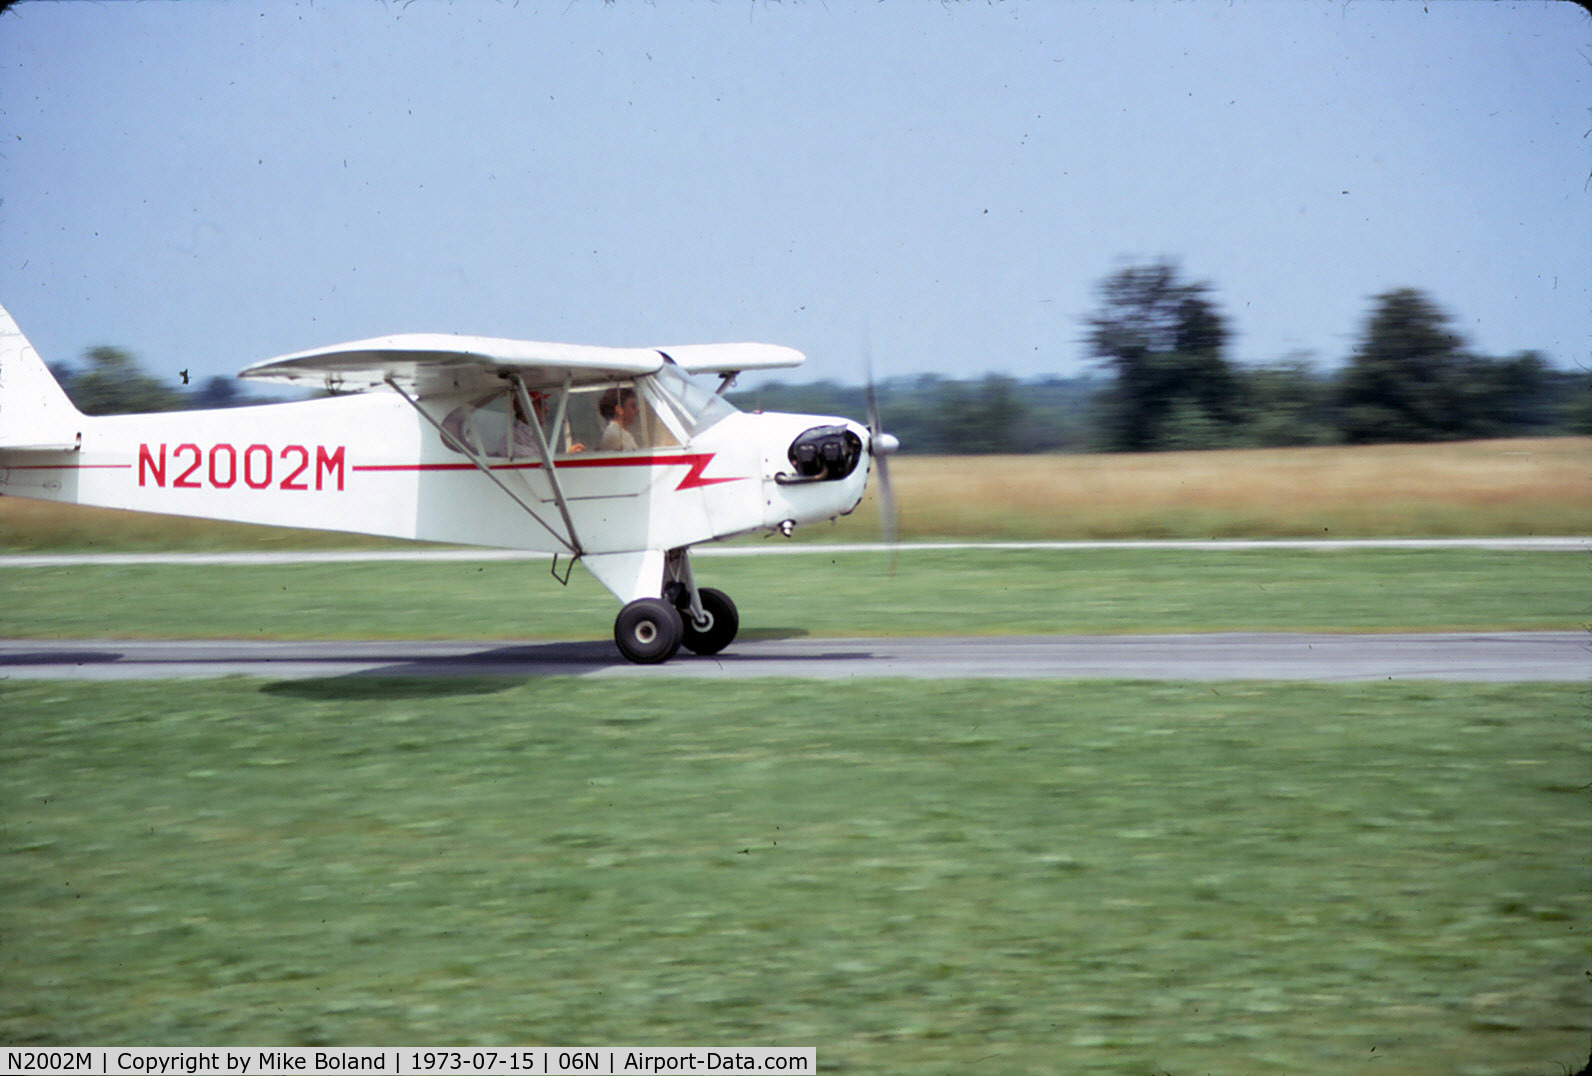 N2002M, 1946 Piper J3C-65 Cub Cub C/N 20763, N2002M flying at Randall Airport, Middletown, NY in 1973